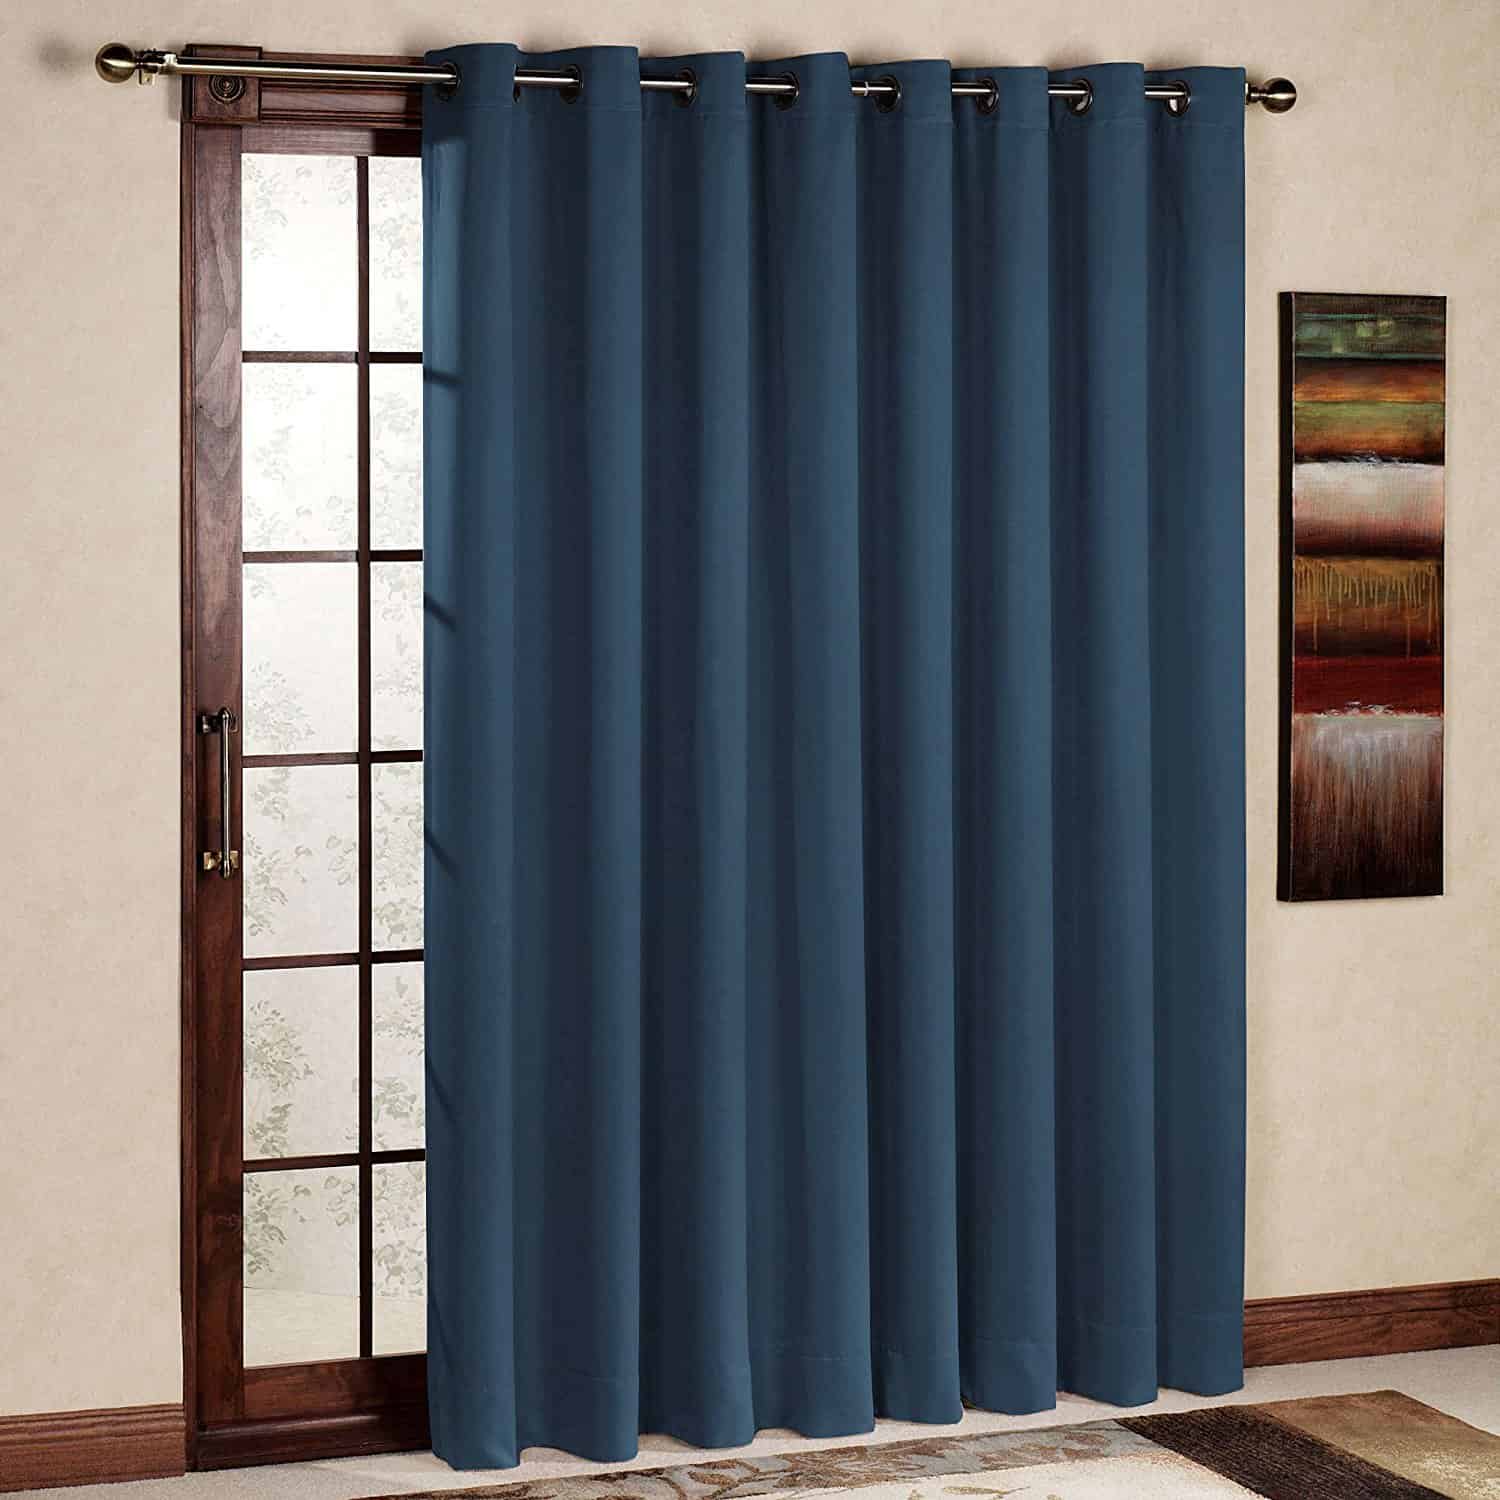 Window Treatments For Sliding Glass, Wide Panel Curtains For Sliding Glass Doors